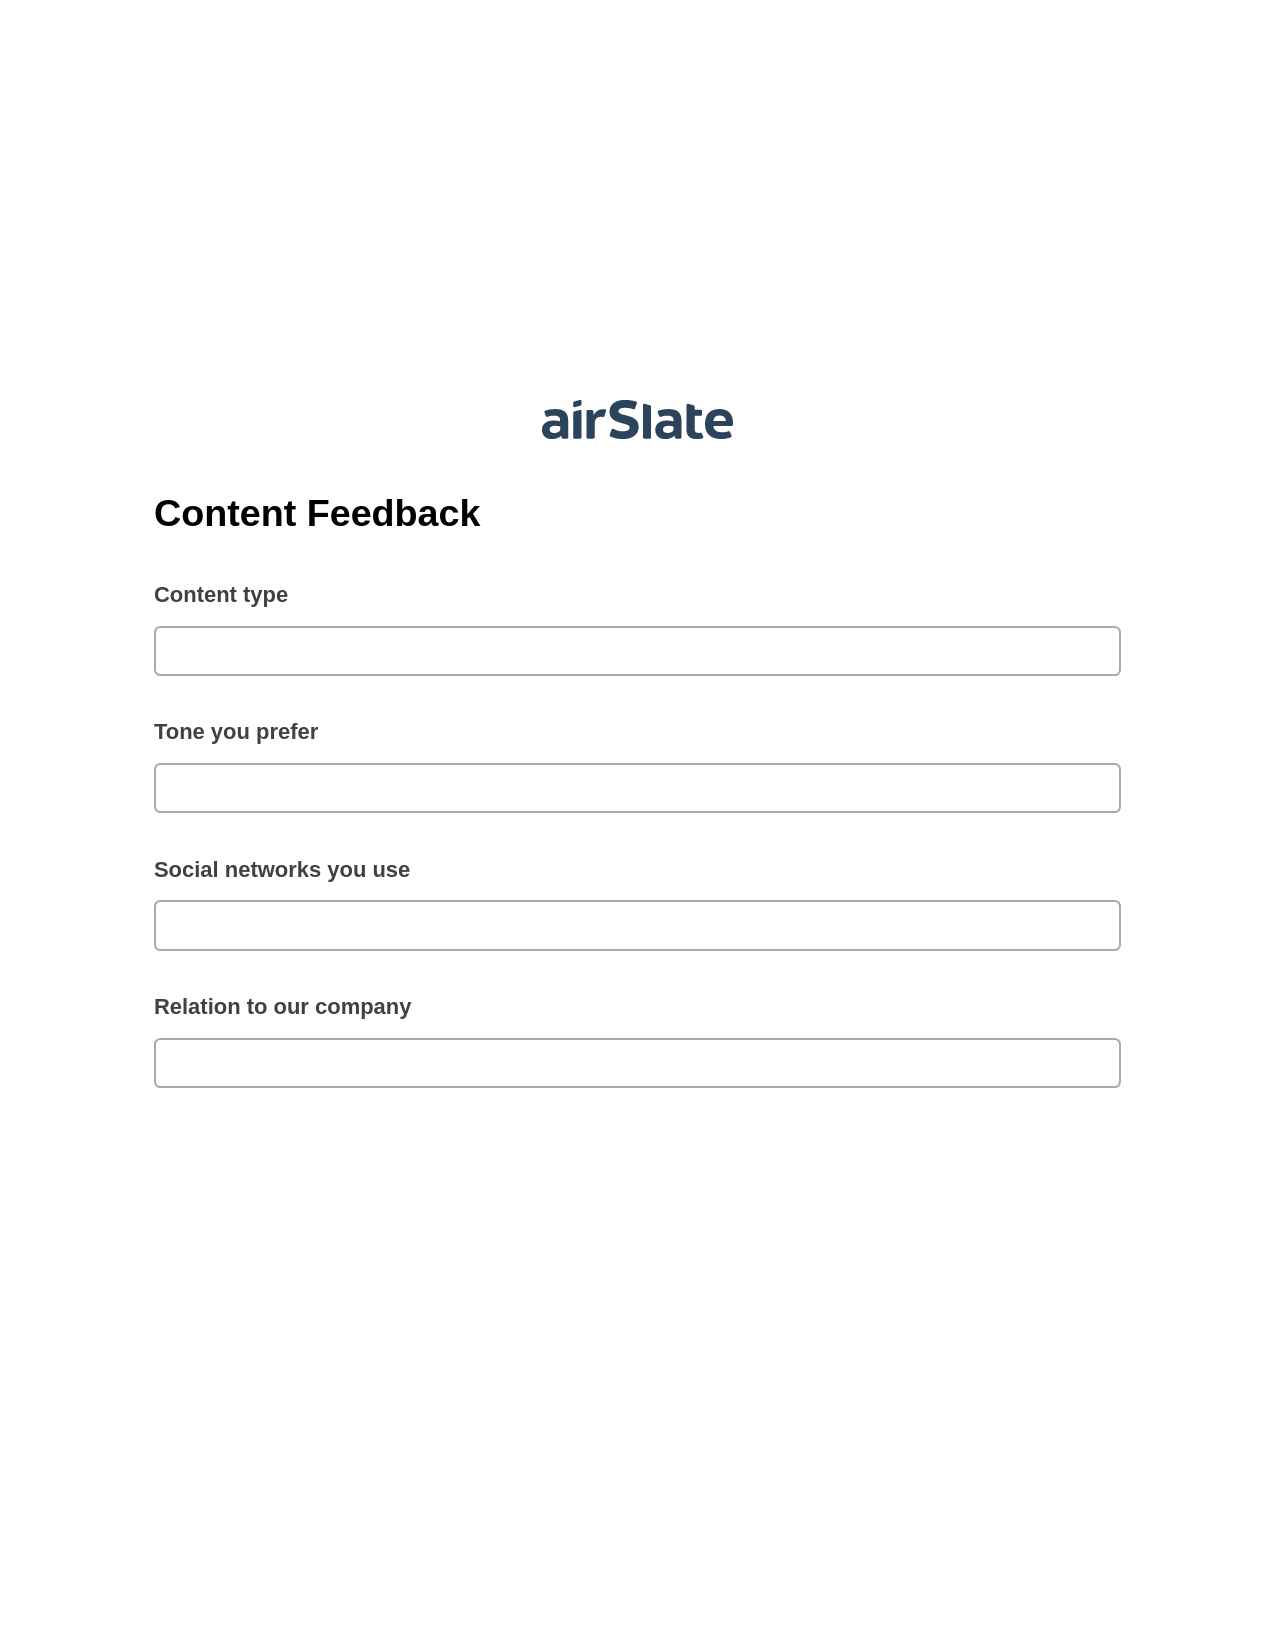 Content Feedback Pre-fill Slate from MS Dynamics 365 Records Bot, Webhook Bot, Archive to SharePoint Folder Bot